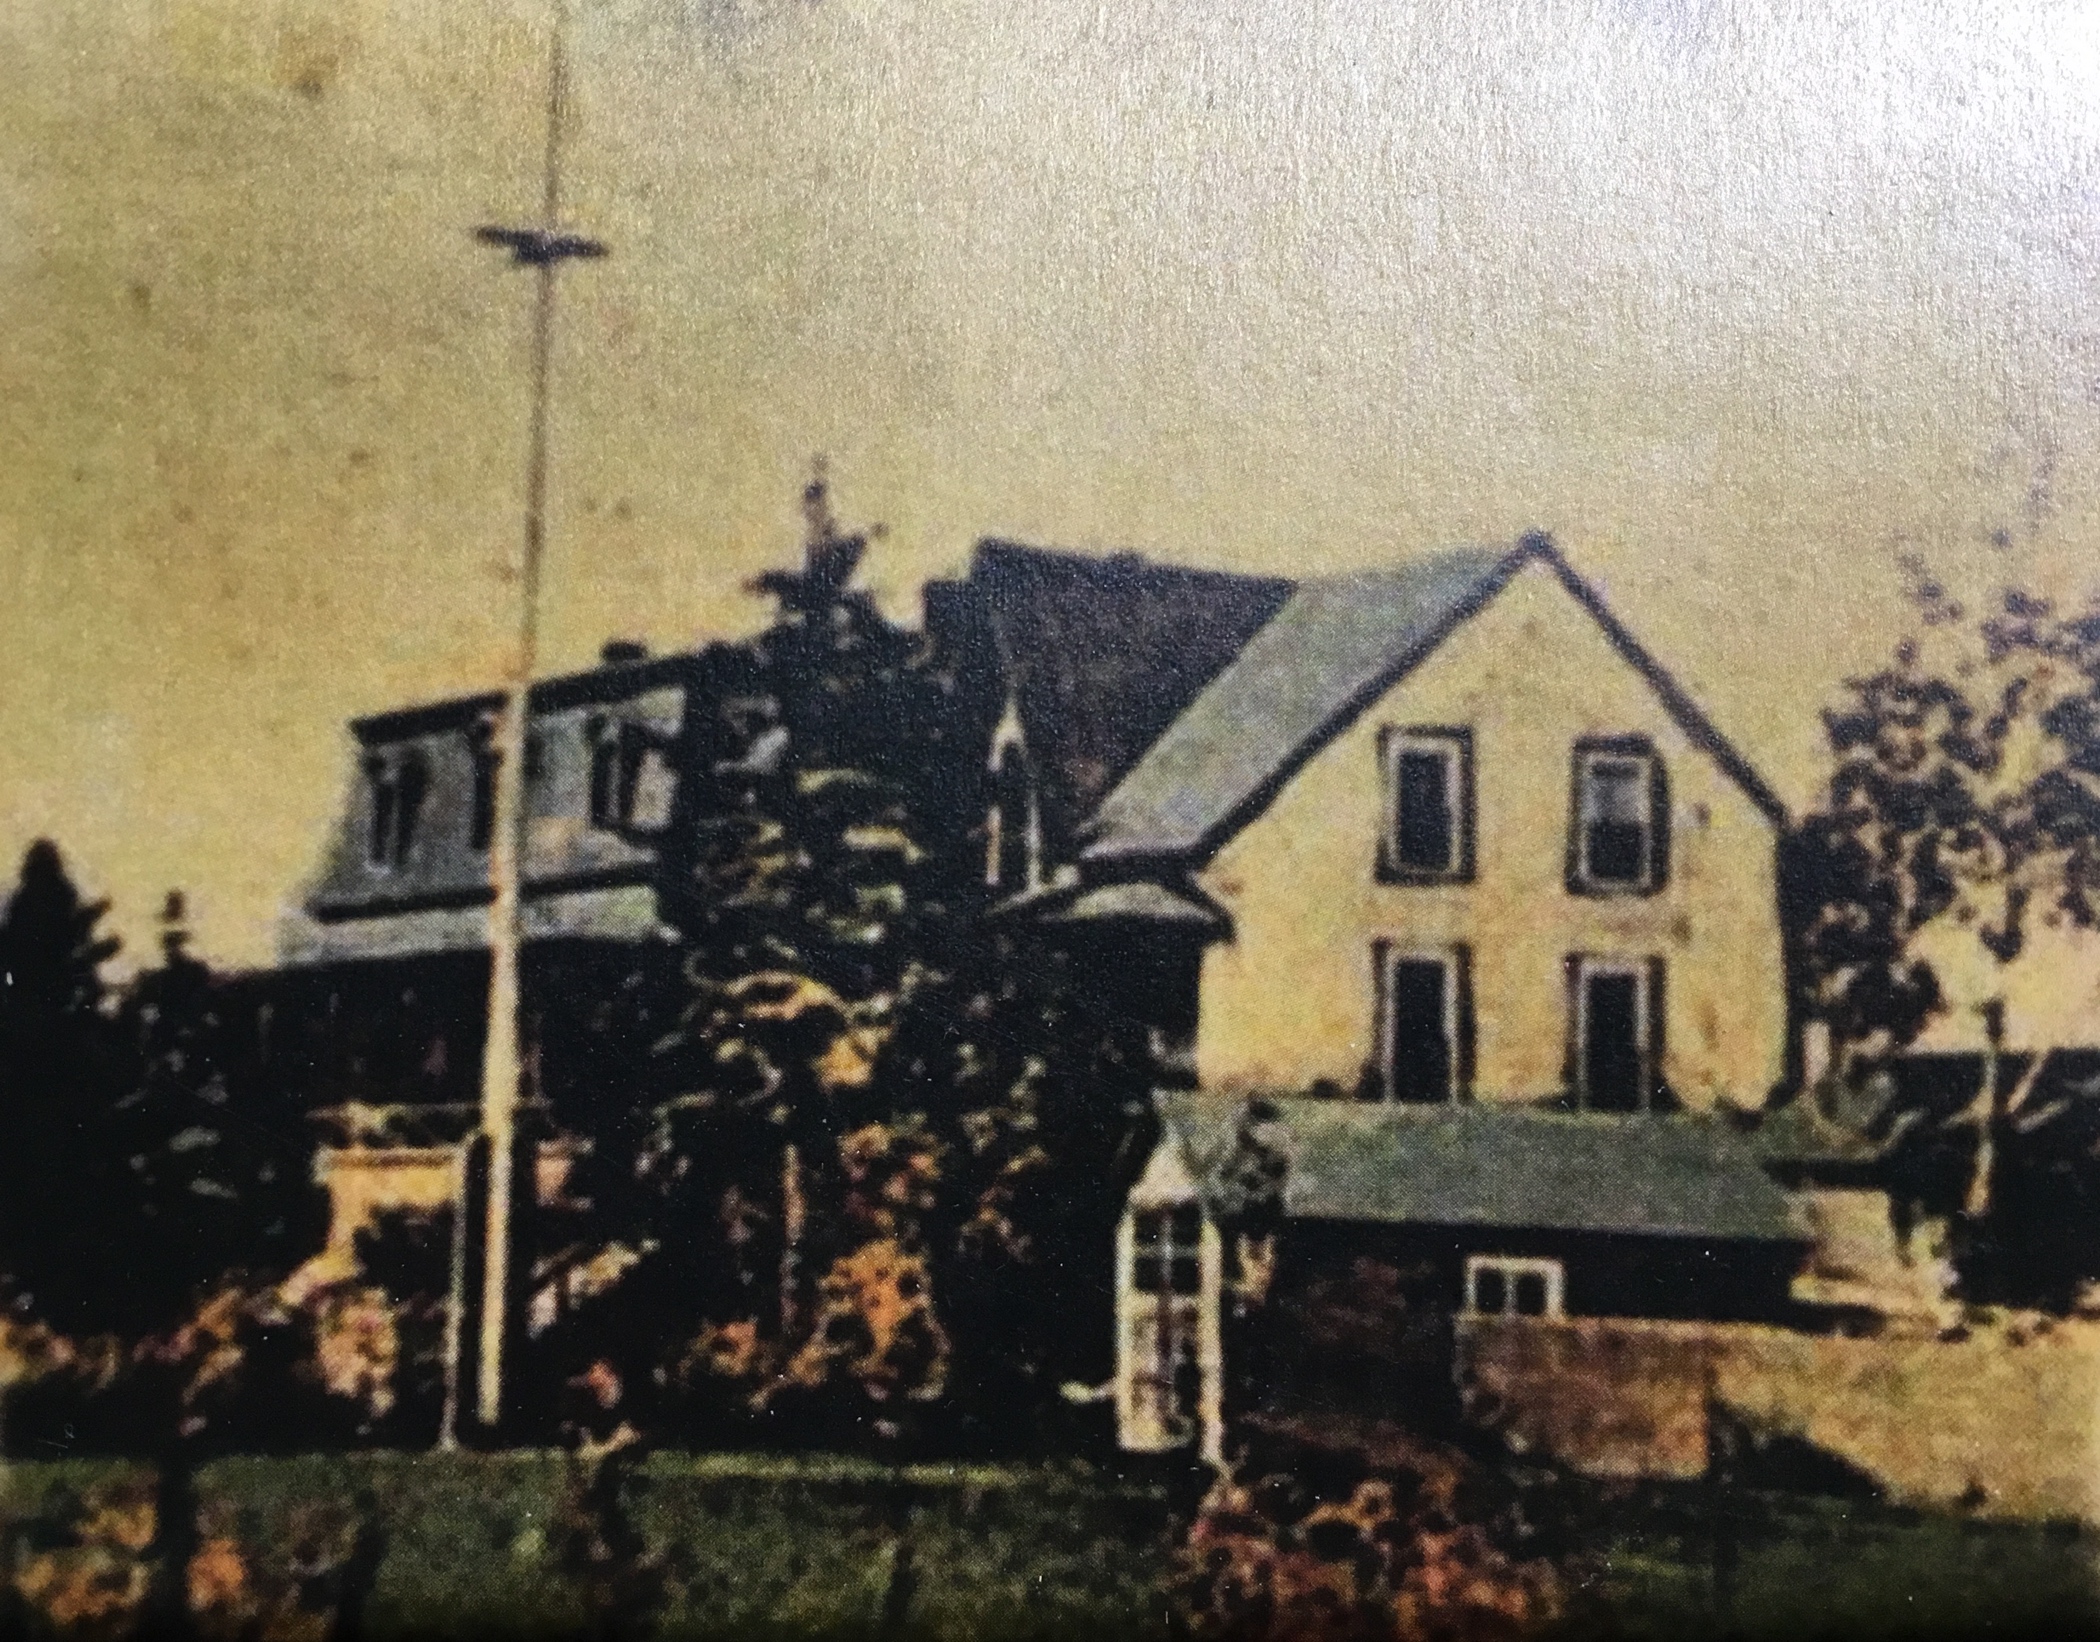 Hand-coloured (originally black and white) photograph of a large house (Villa Les Rochers) with a flagpole in front of it, and a shed attached to the side of it.